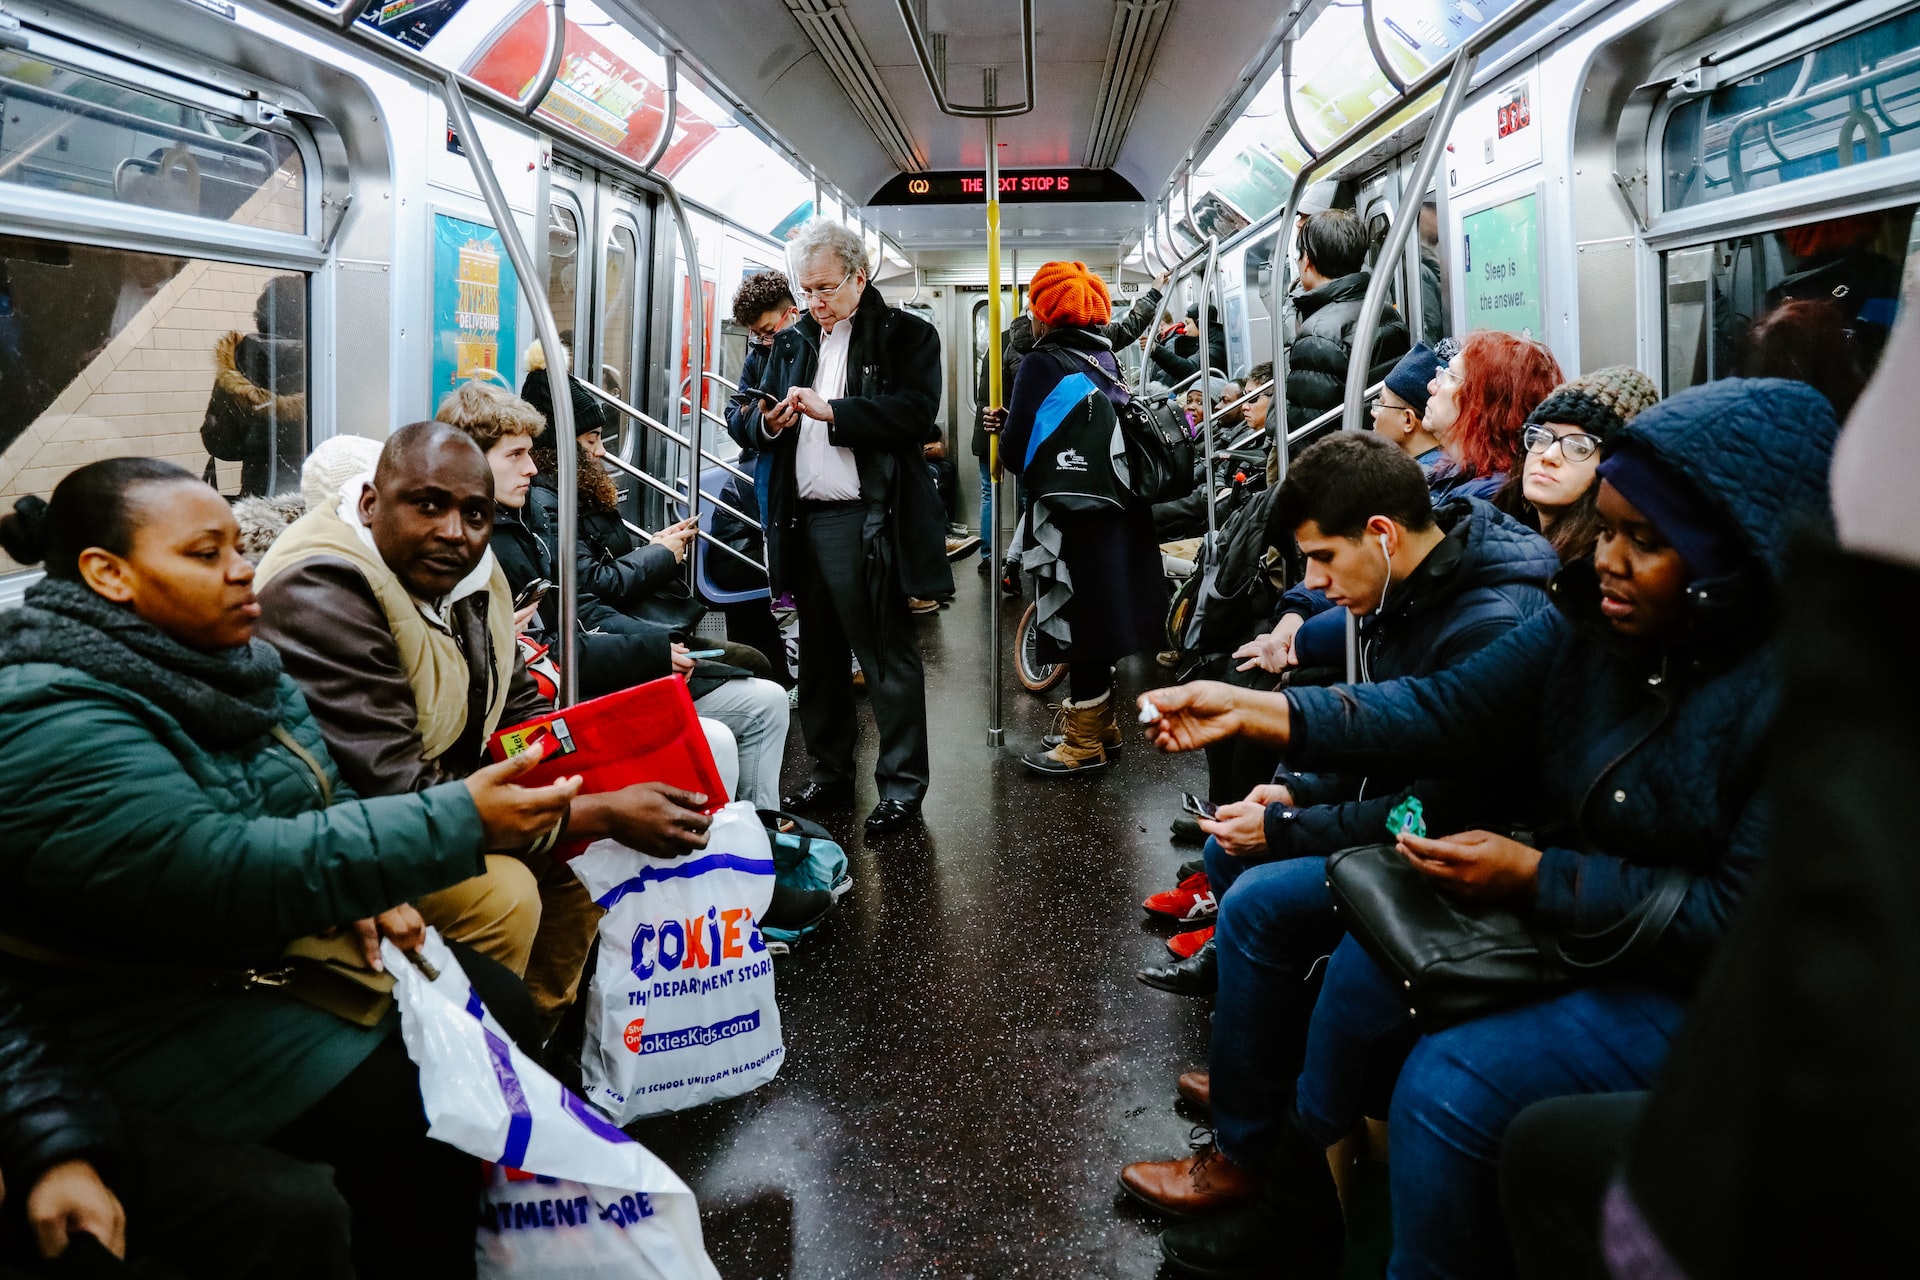 A diverse amount of people riding the subway in New York City.